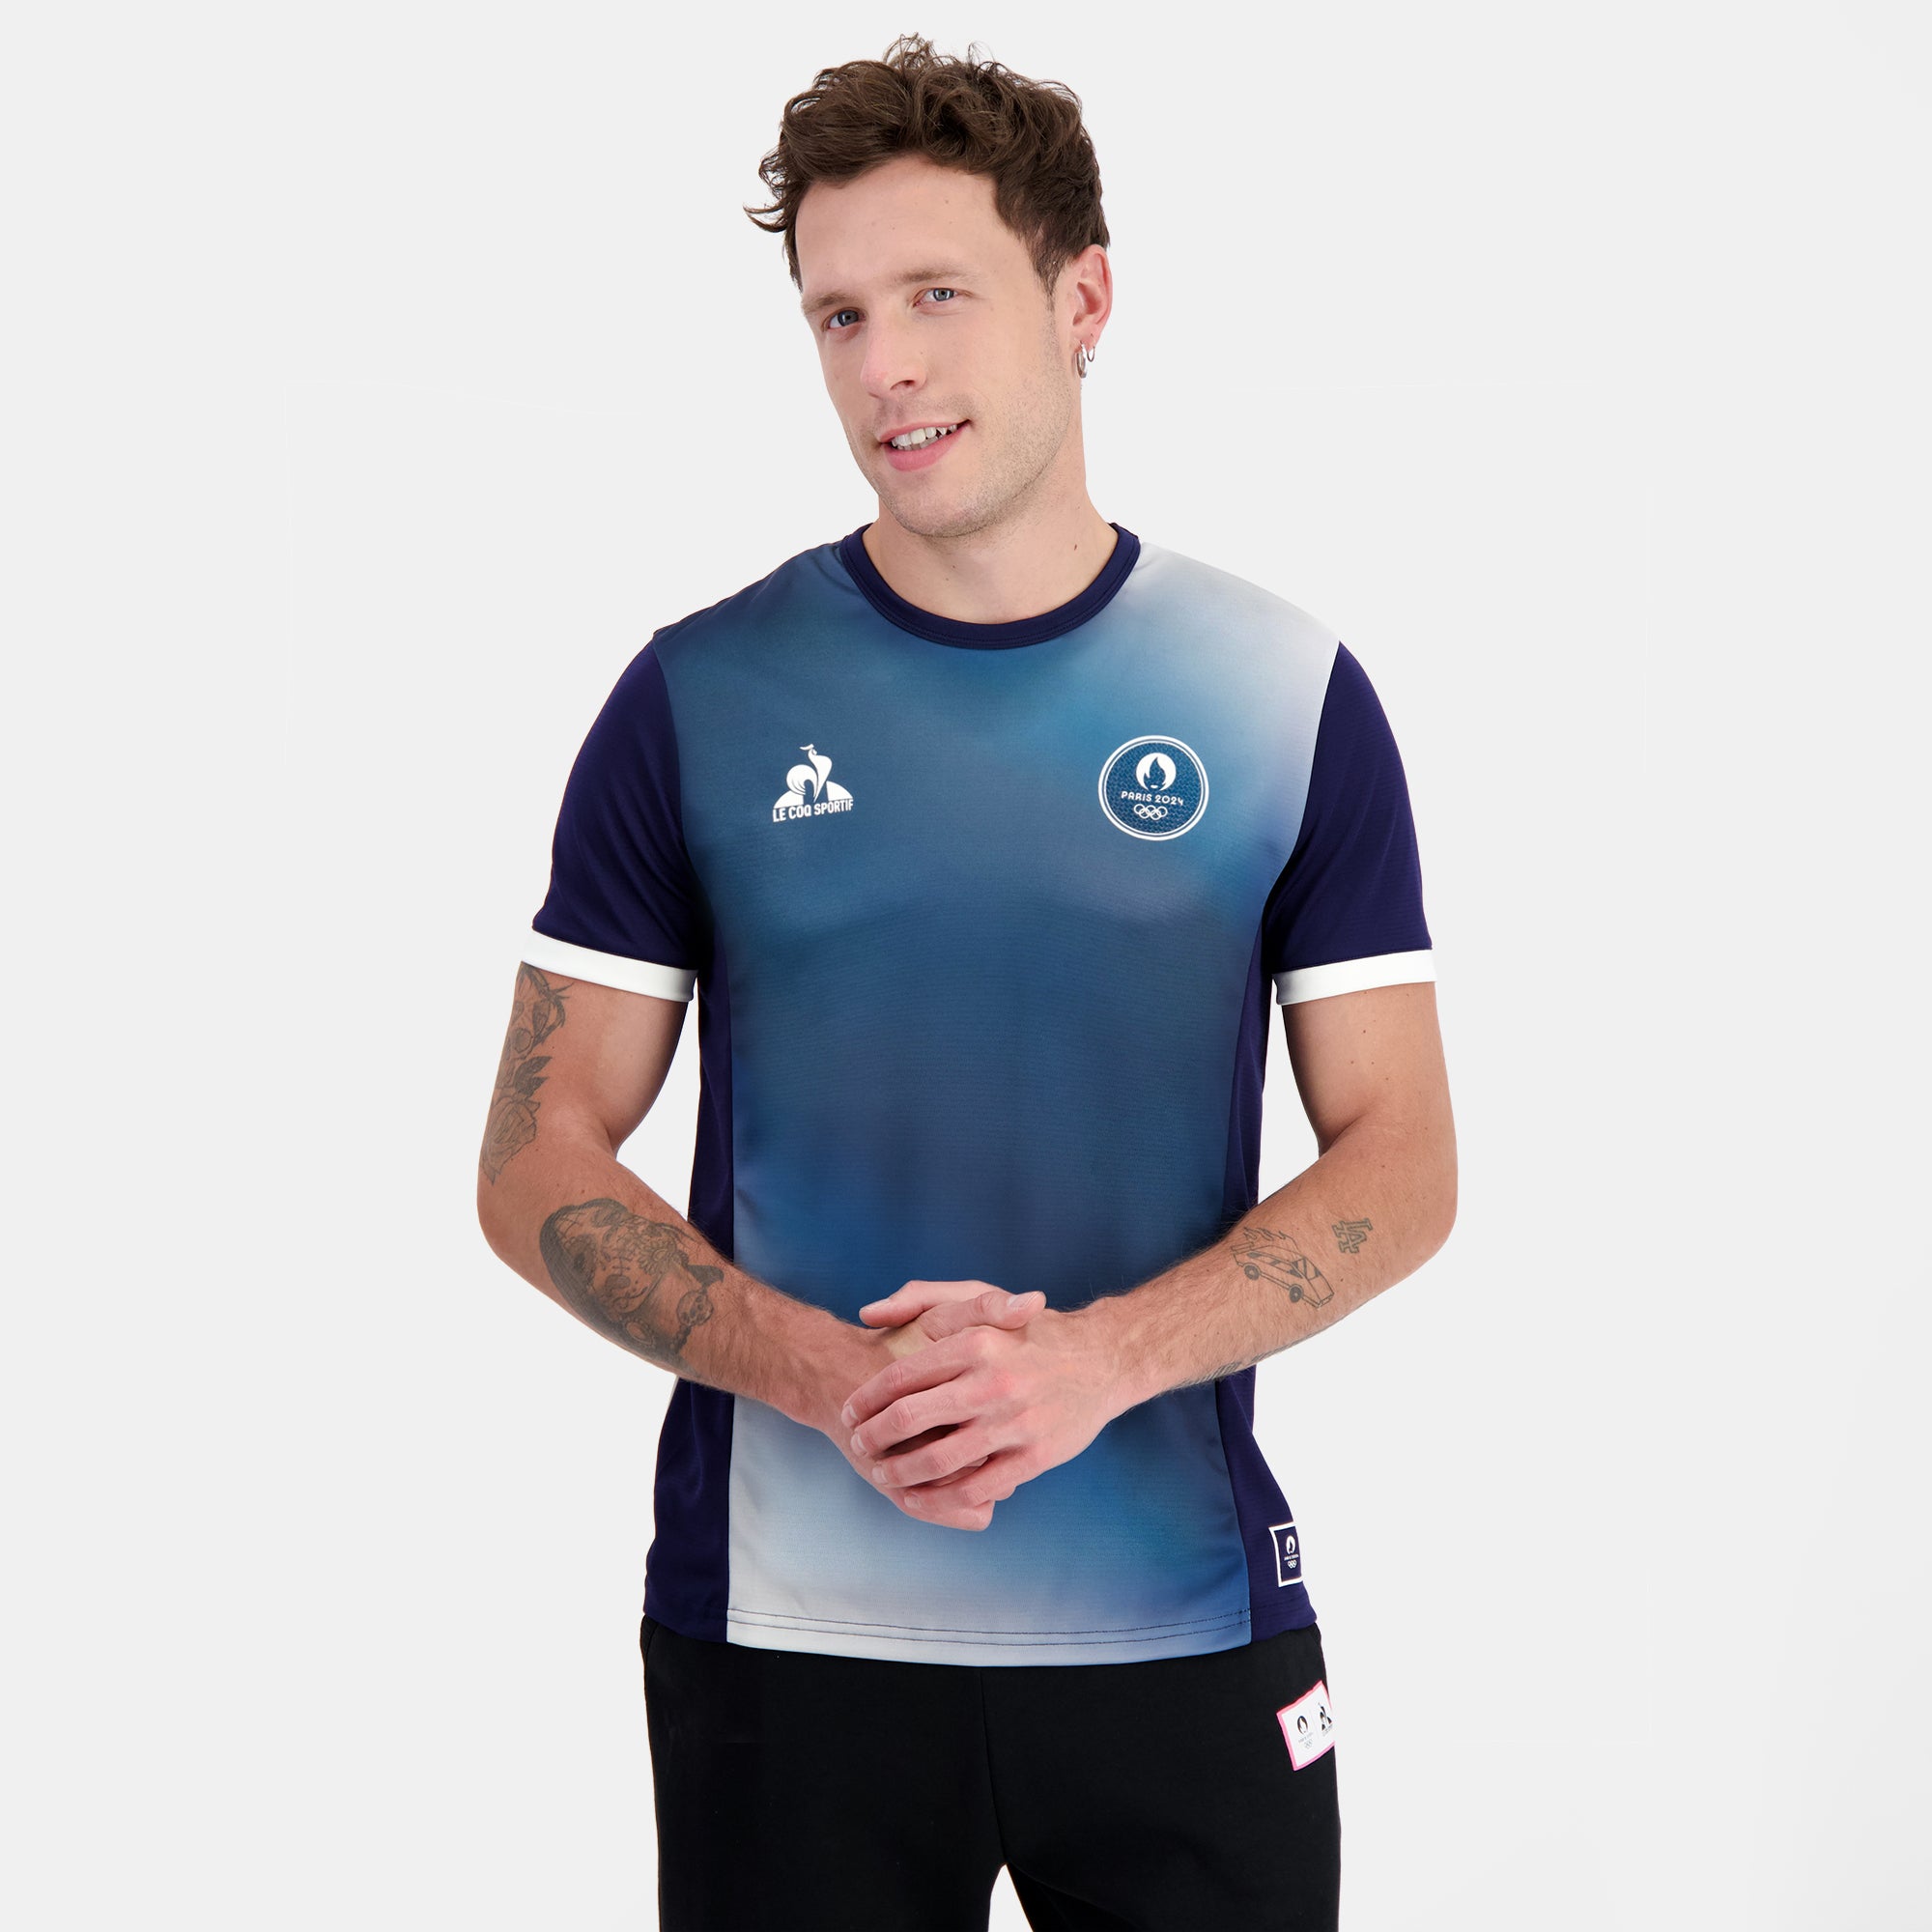 Le Coq Sportif: French sports clothing and shoes brand